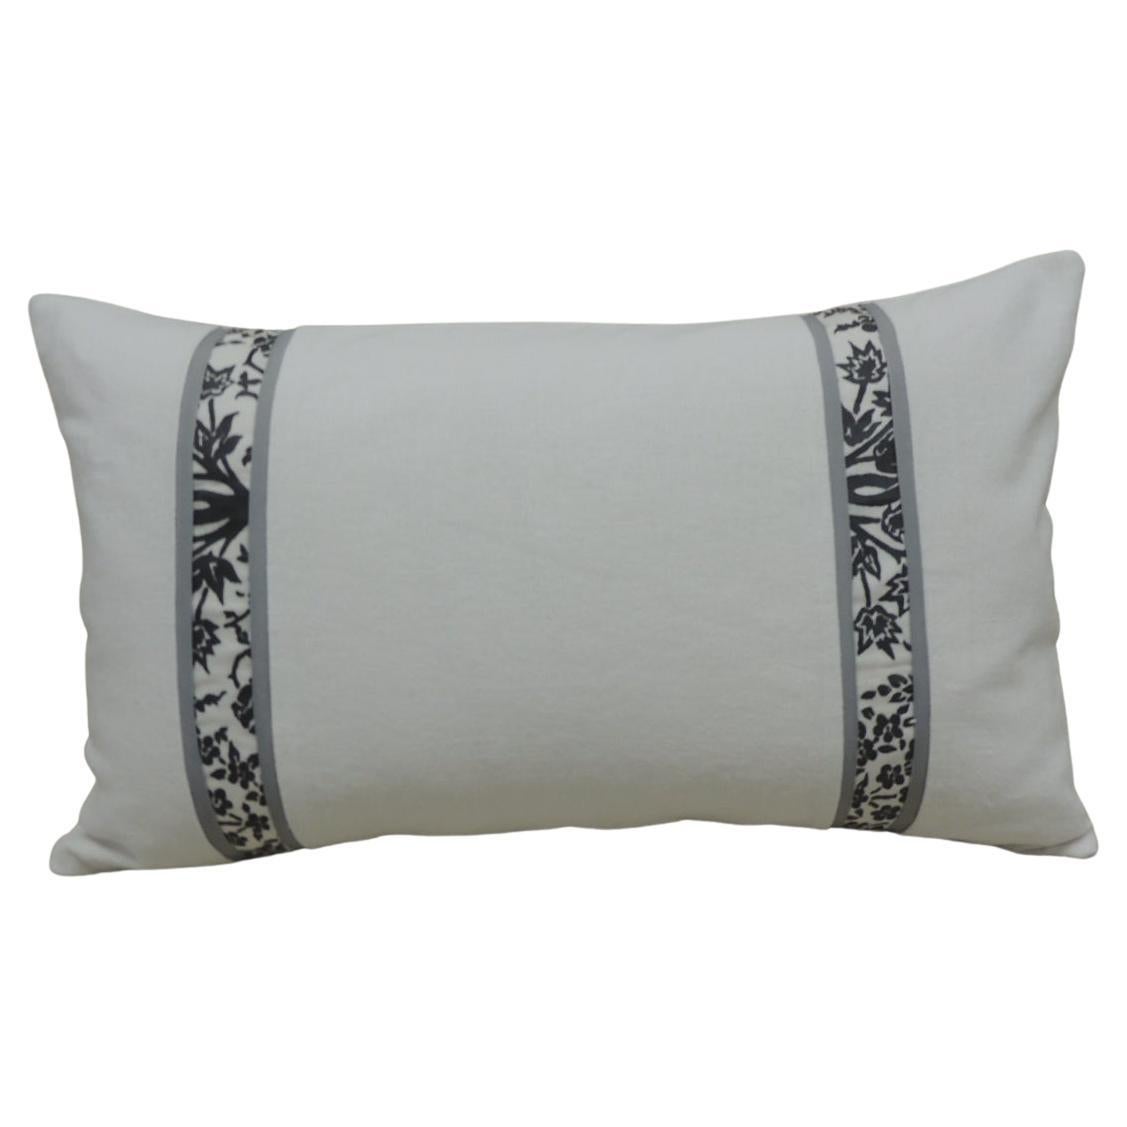 Vintage Fortuny Alderelli Fabric in Midnight and White Decorative Lumbar Pillow